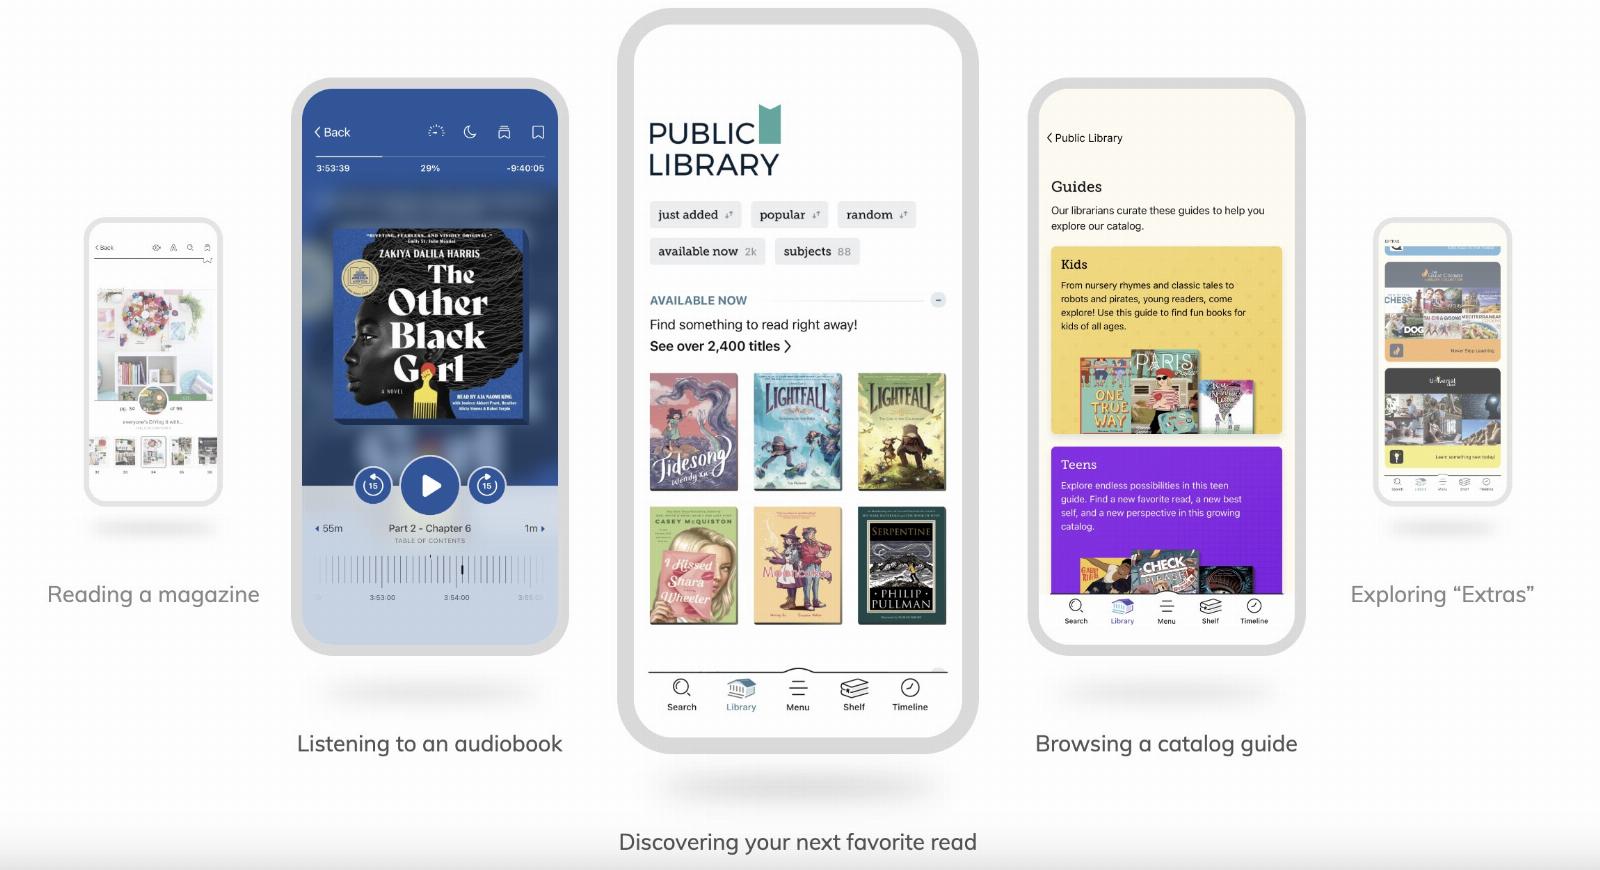 Library e-book app OverDrive to shut down on May 1st, readers directed to Libby instead